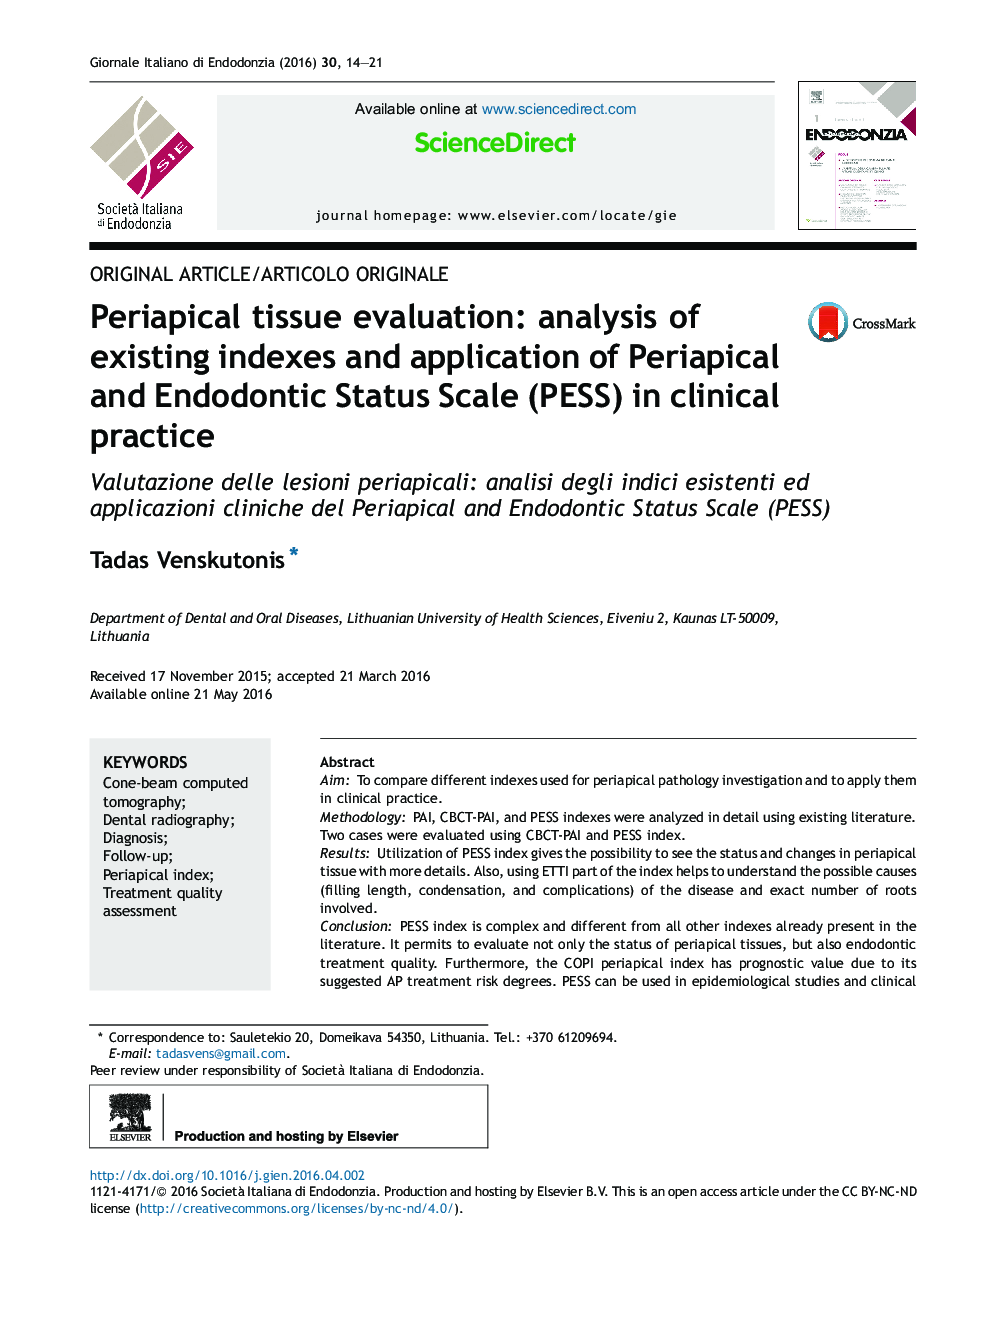 Periapical tissue evaluation: analysis of existing indexes and application of Periapical and Endodontic Status Scale (PESS) in clinical practice 